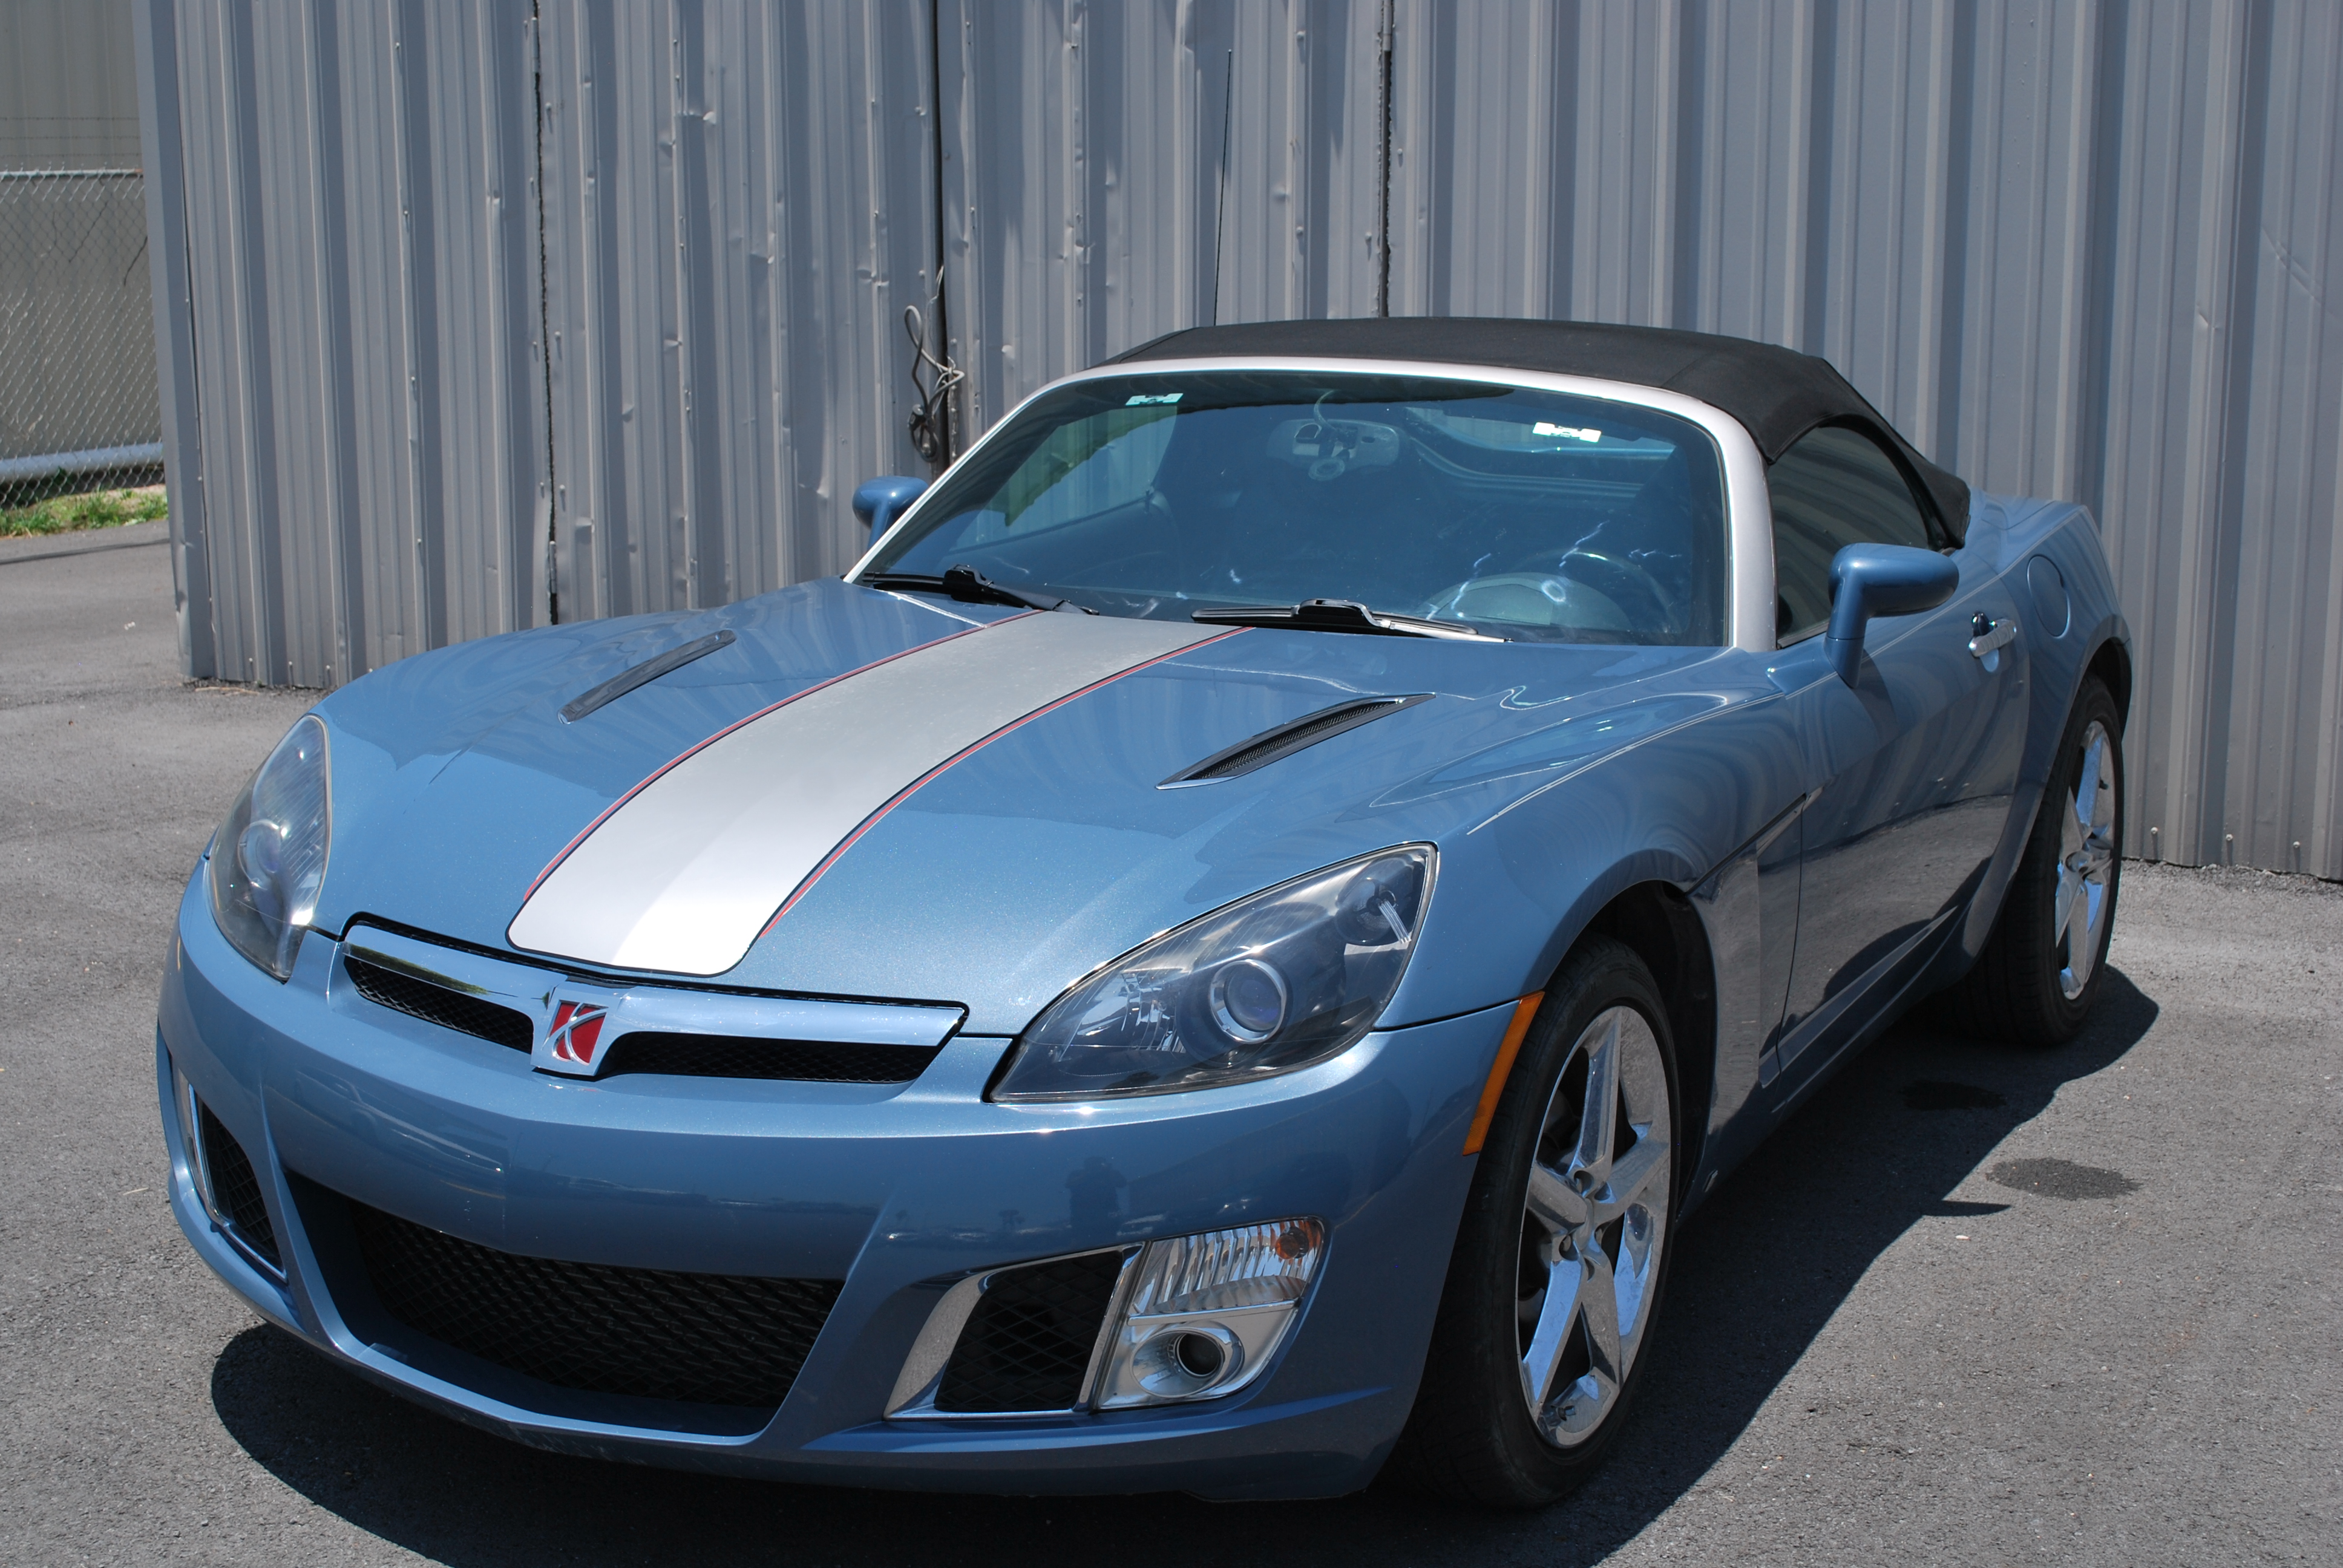 Used Saturn Sky for sale in Houston TX.  We Finance! 